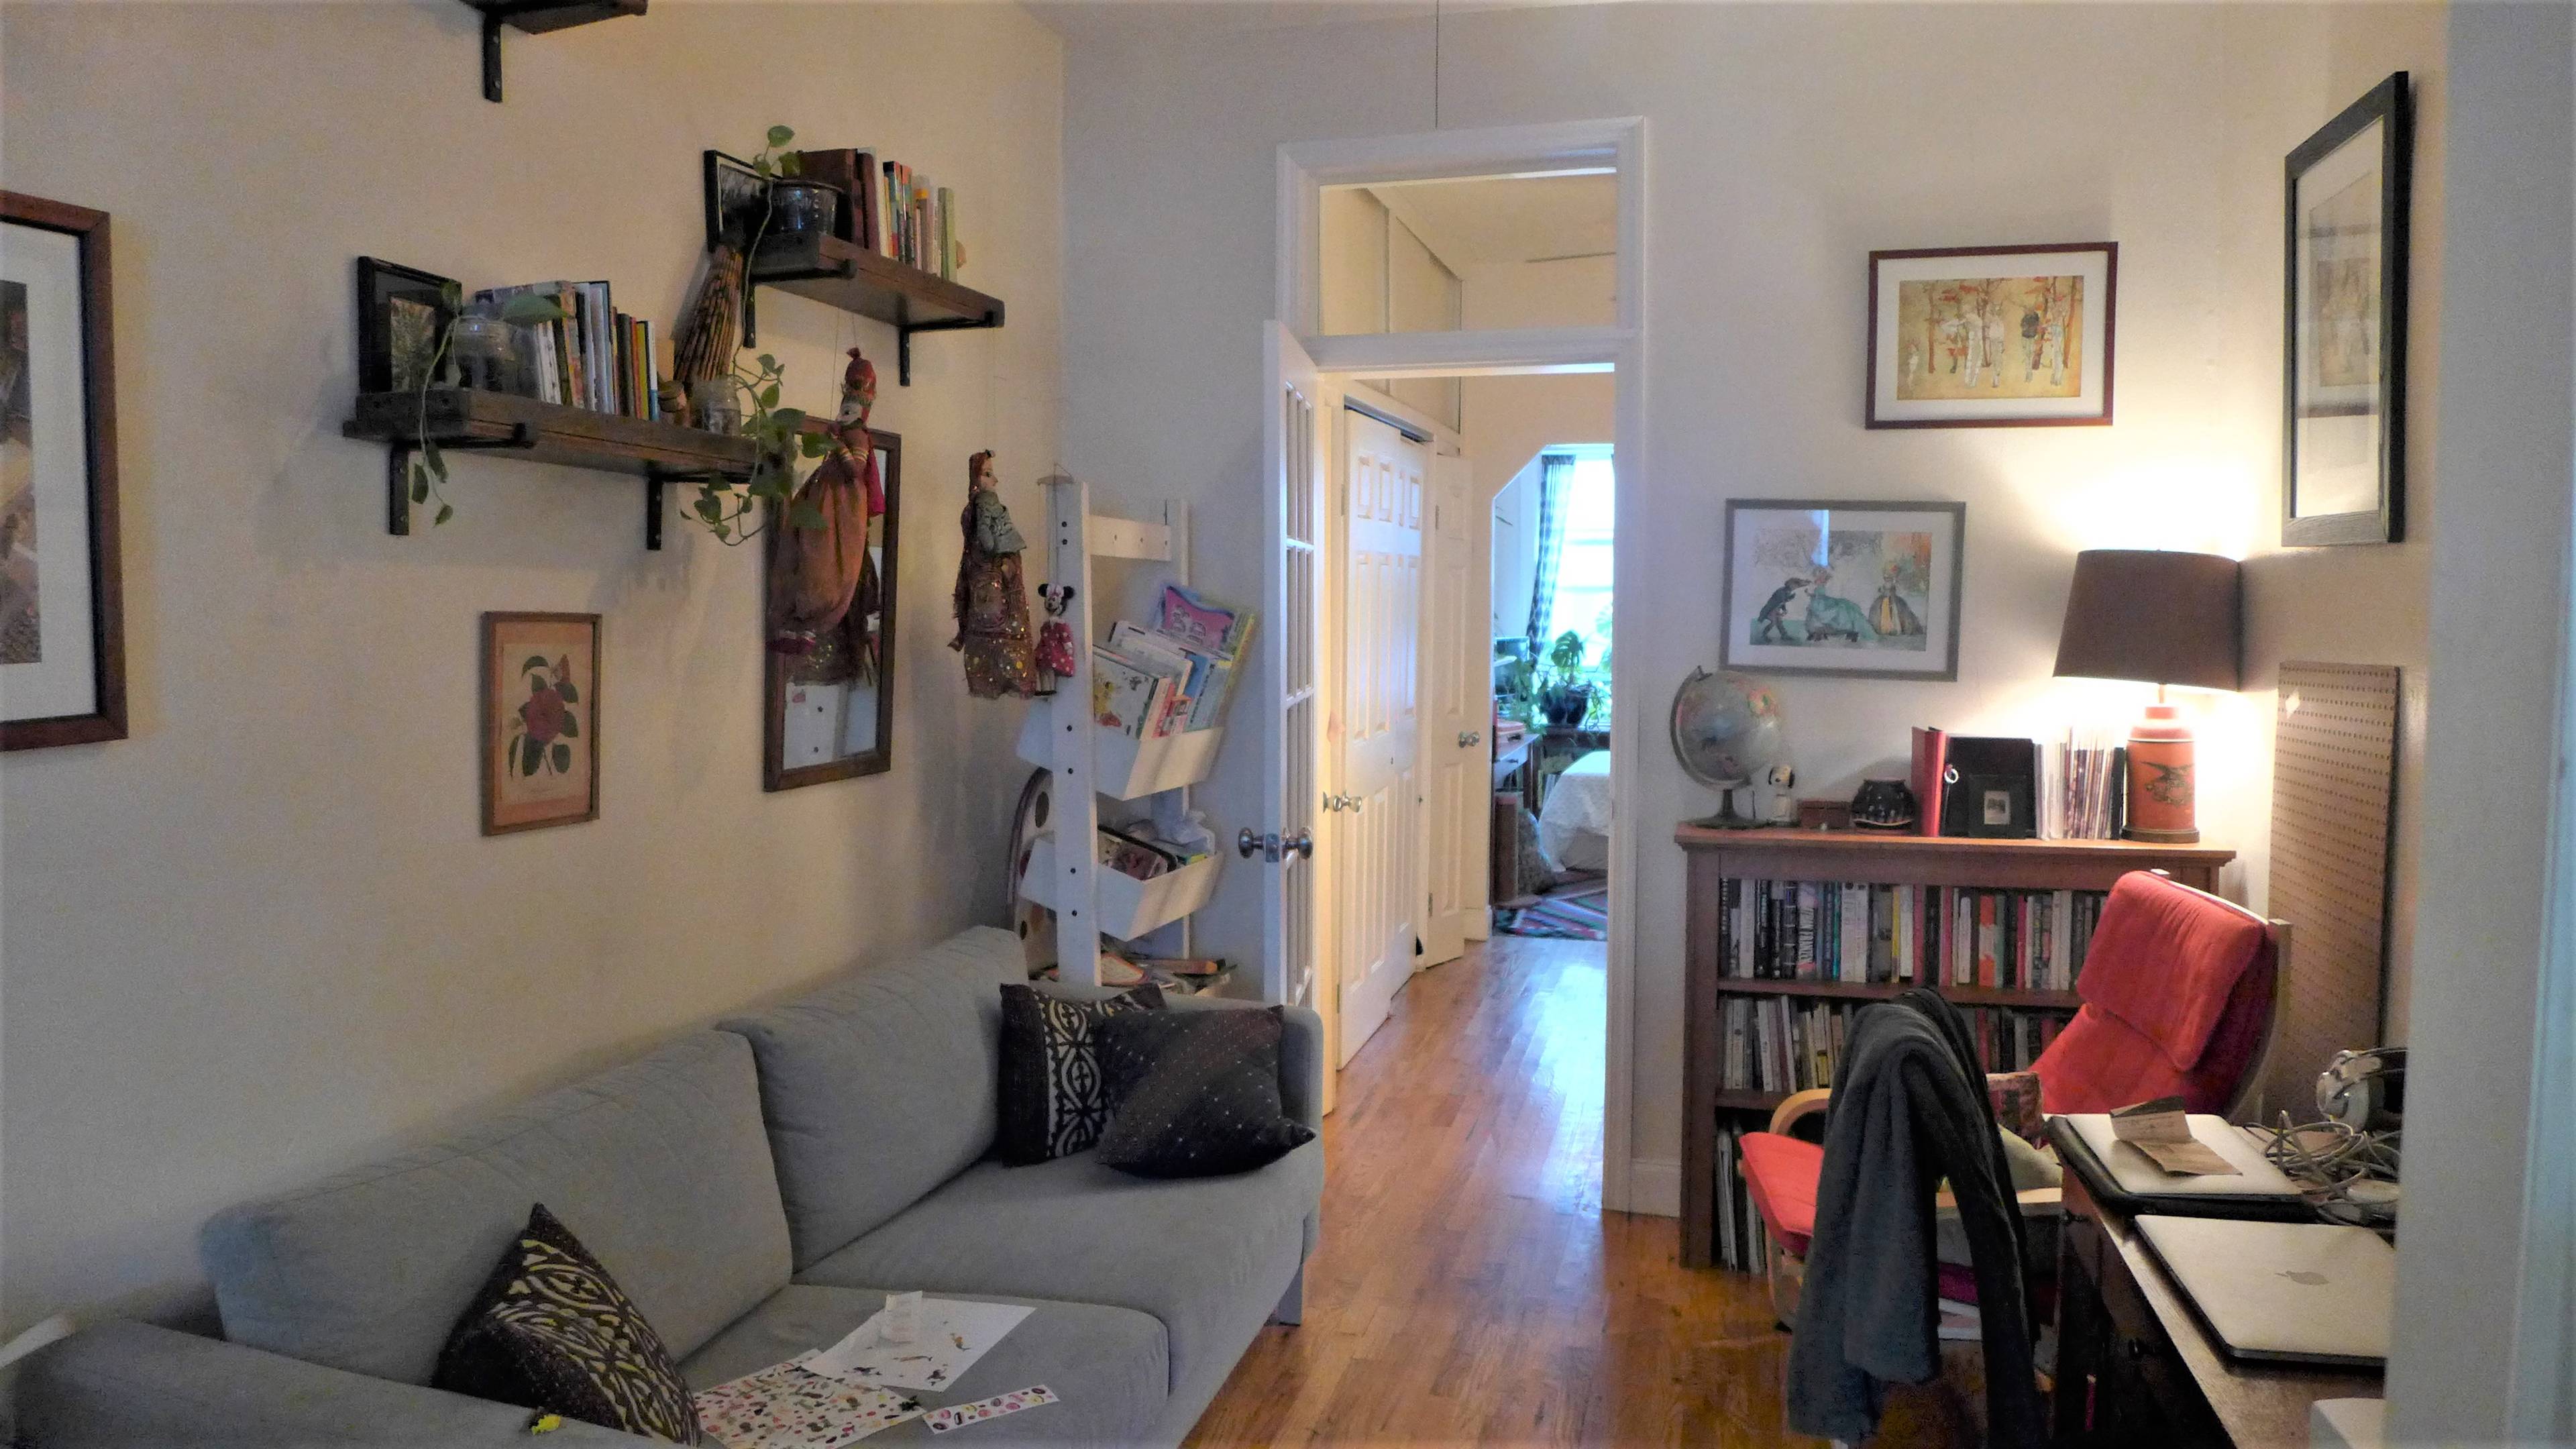 This appealing and charming 1BR den floorthrough offers a versatile and spacious layout.